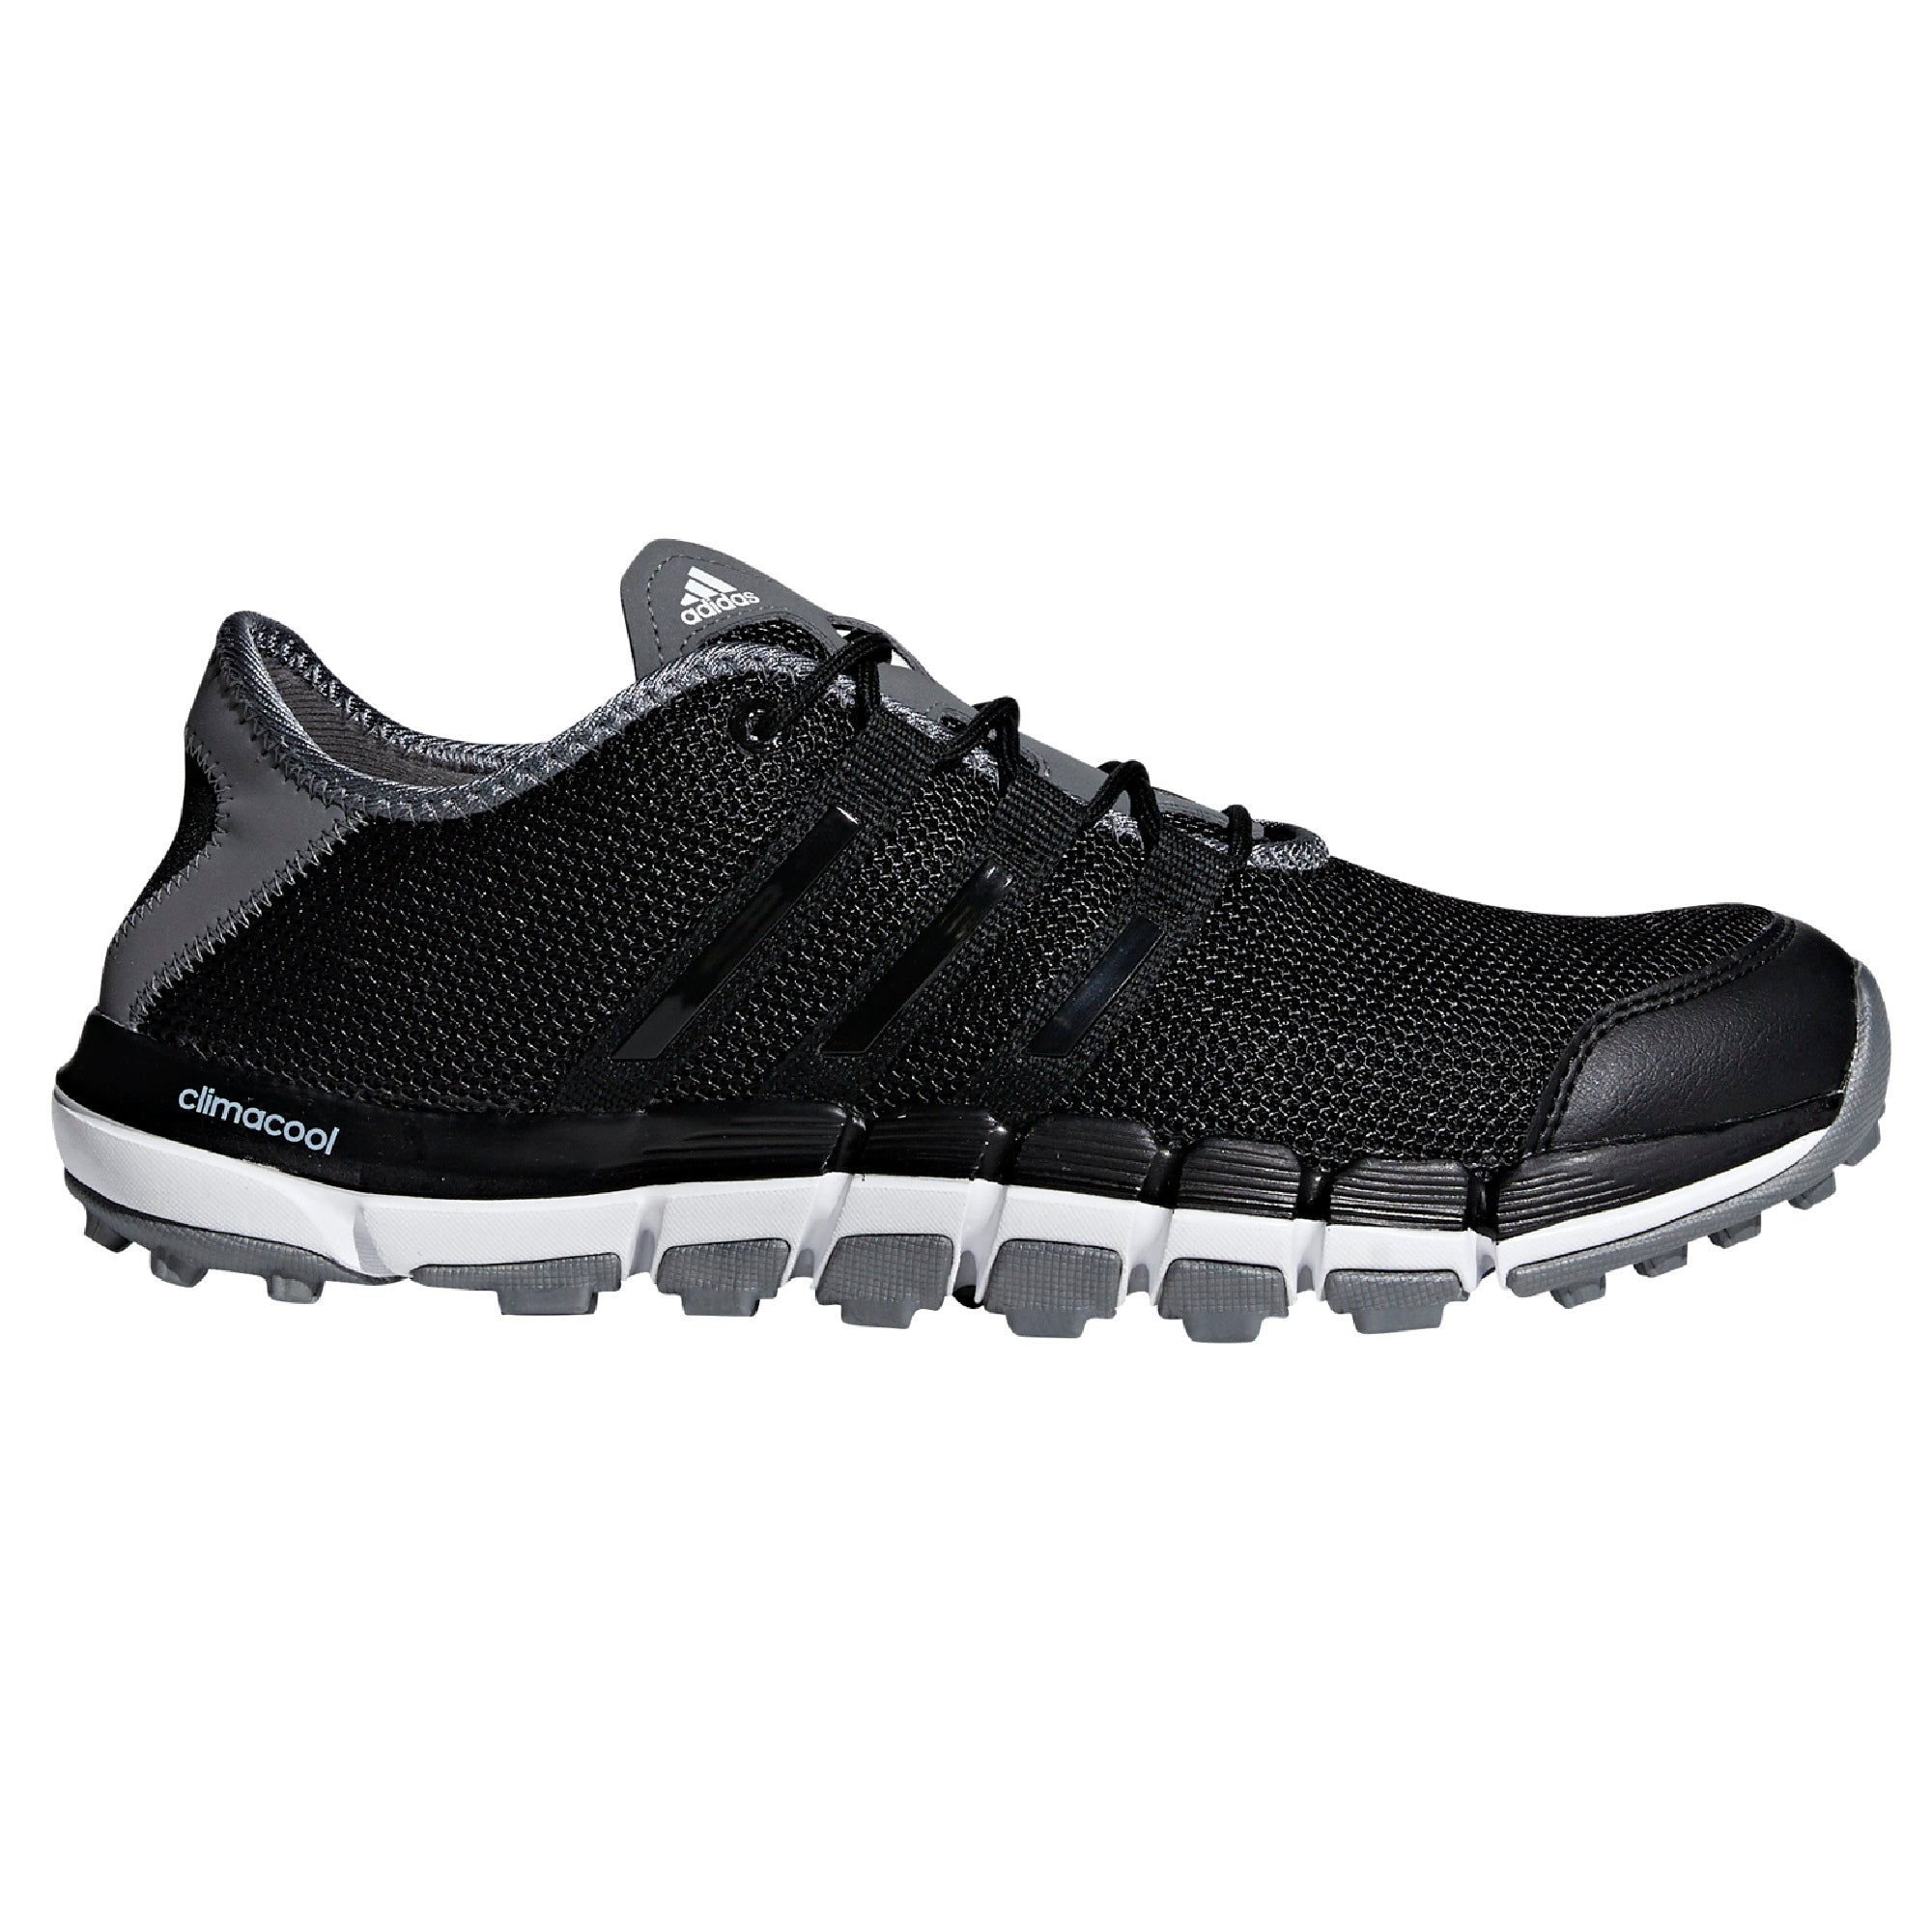 adidas climacool st golf shoes review